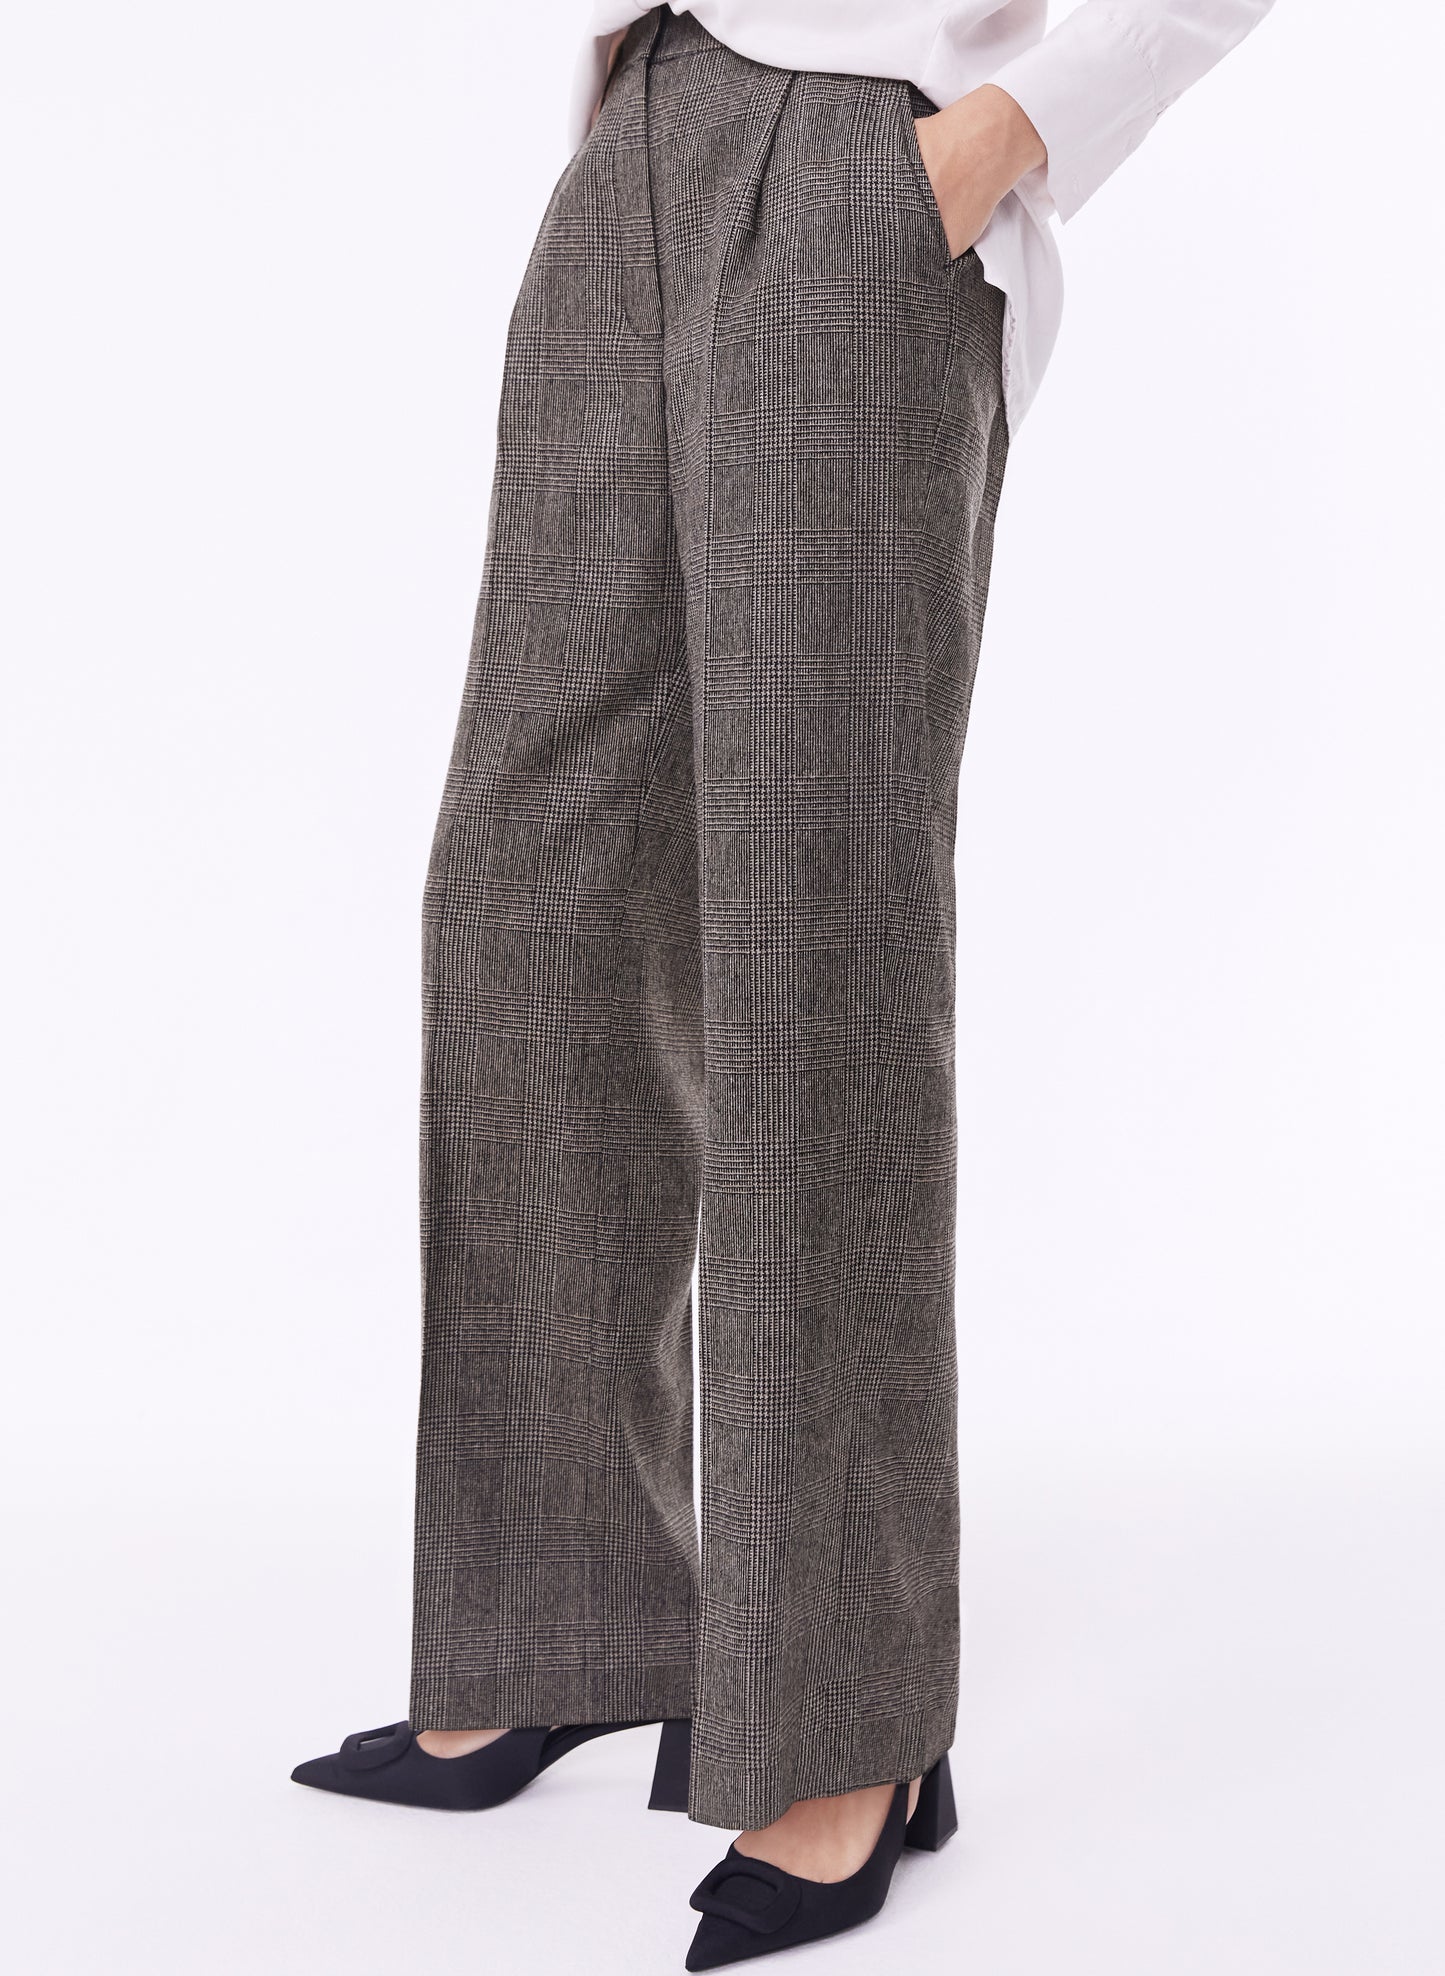 Victoria Recycled Wool Blend Trousers